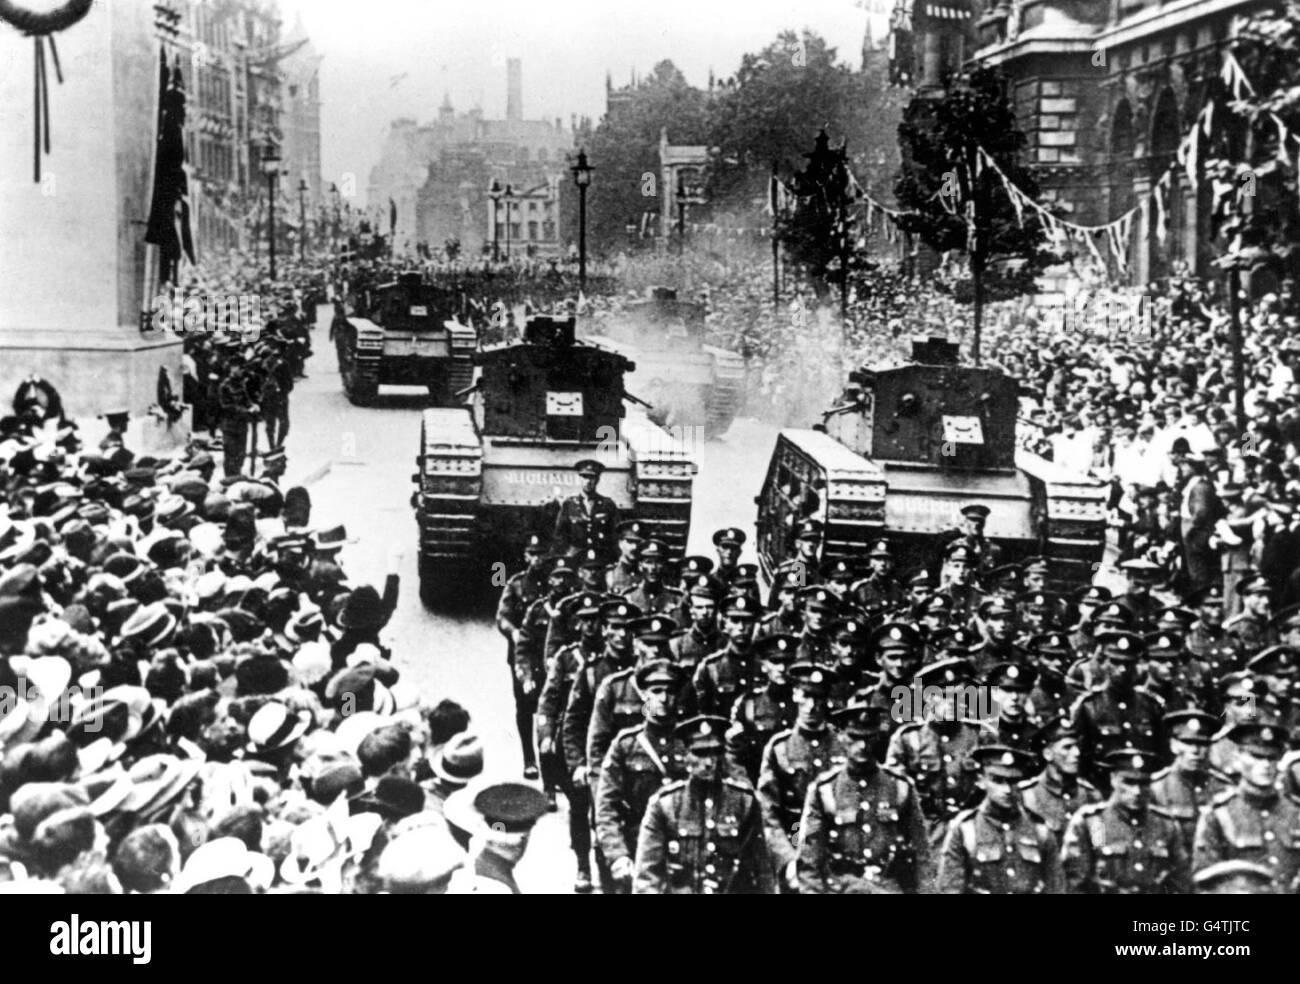 The 1919 Victory Parade passes down Whitehall to mark the end of the First World War. Stock Photo